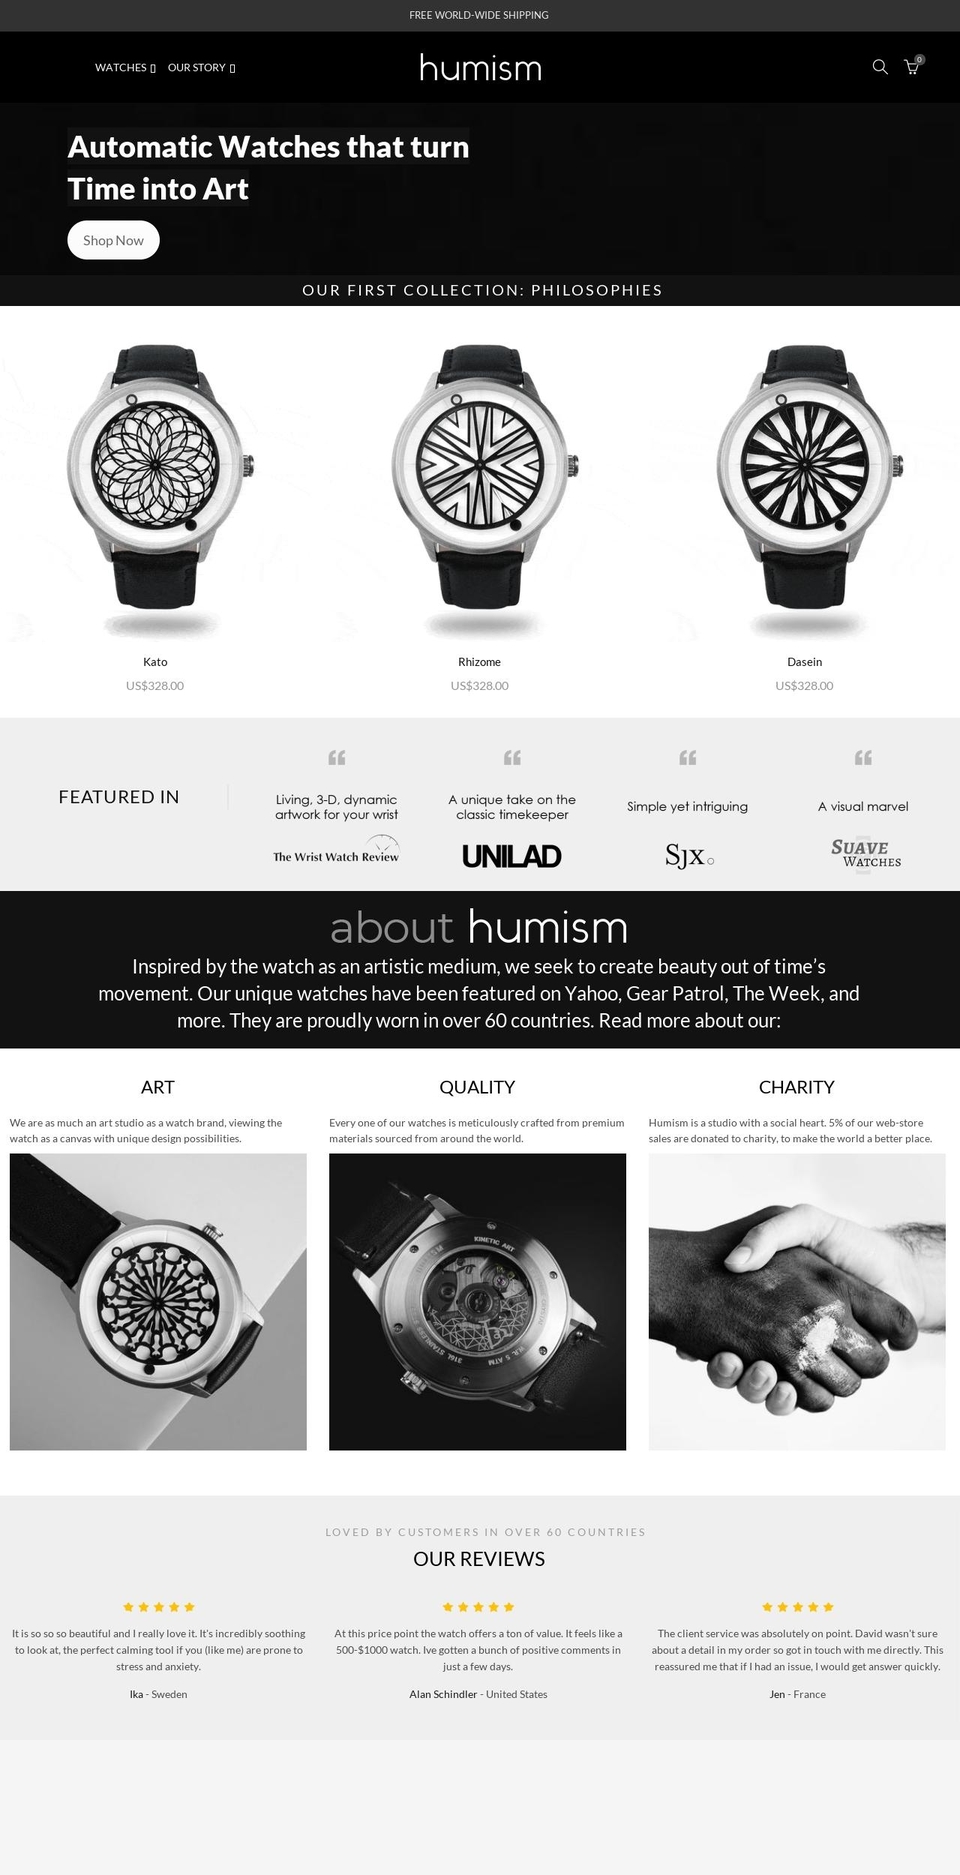 basel Shopify theme site example humism.com